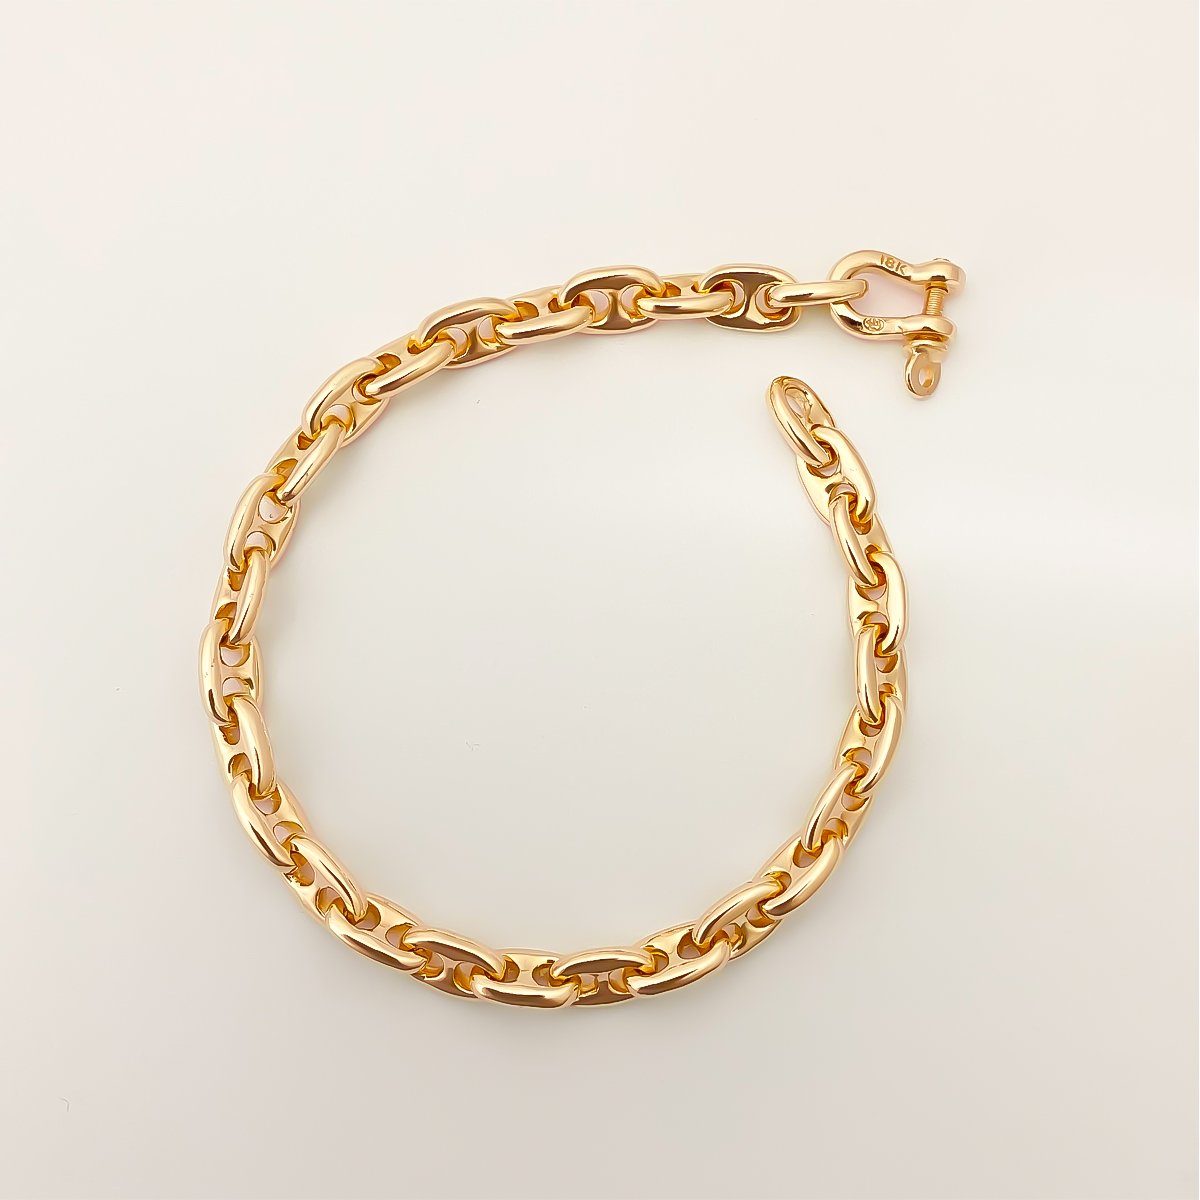 Buy Gold Bracelet Design Gold Beads Light Weight Gold Covering Hand Chain  for Girls